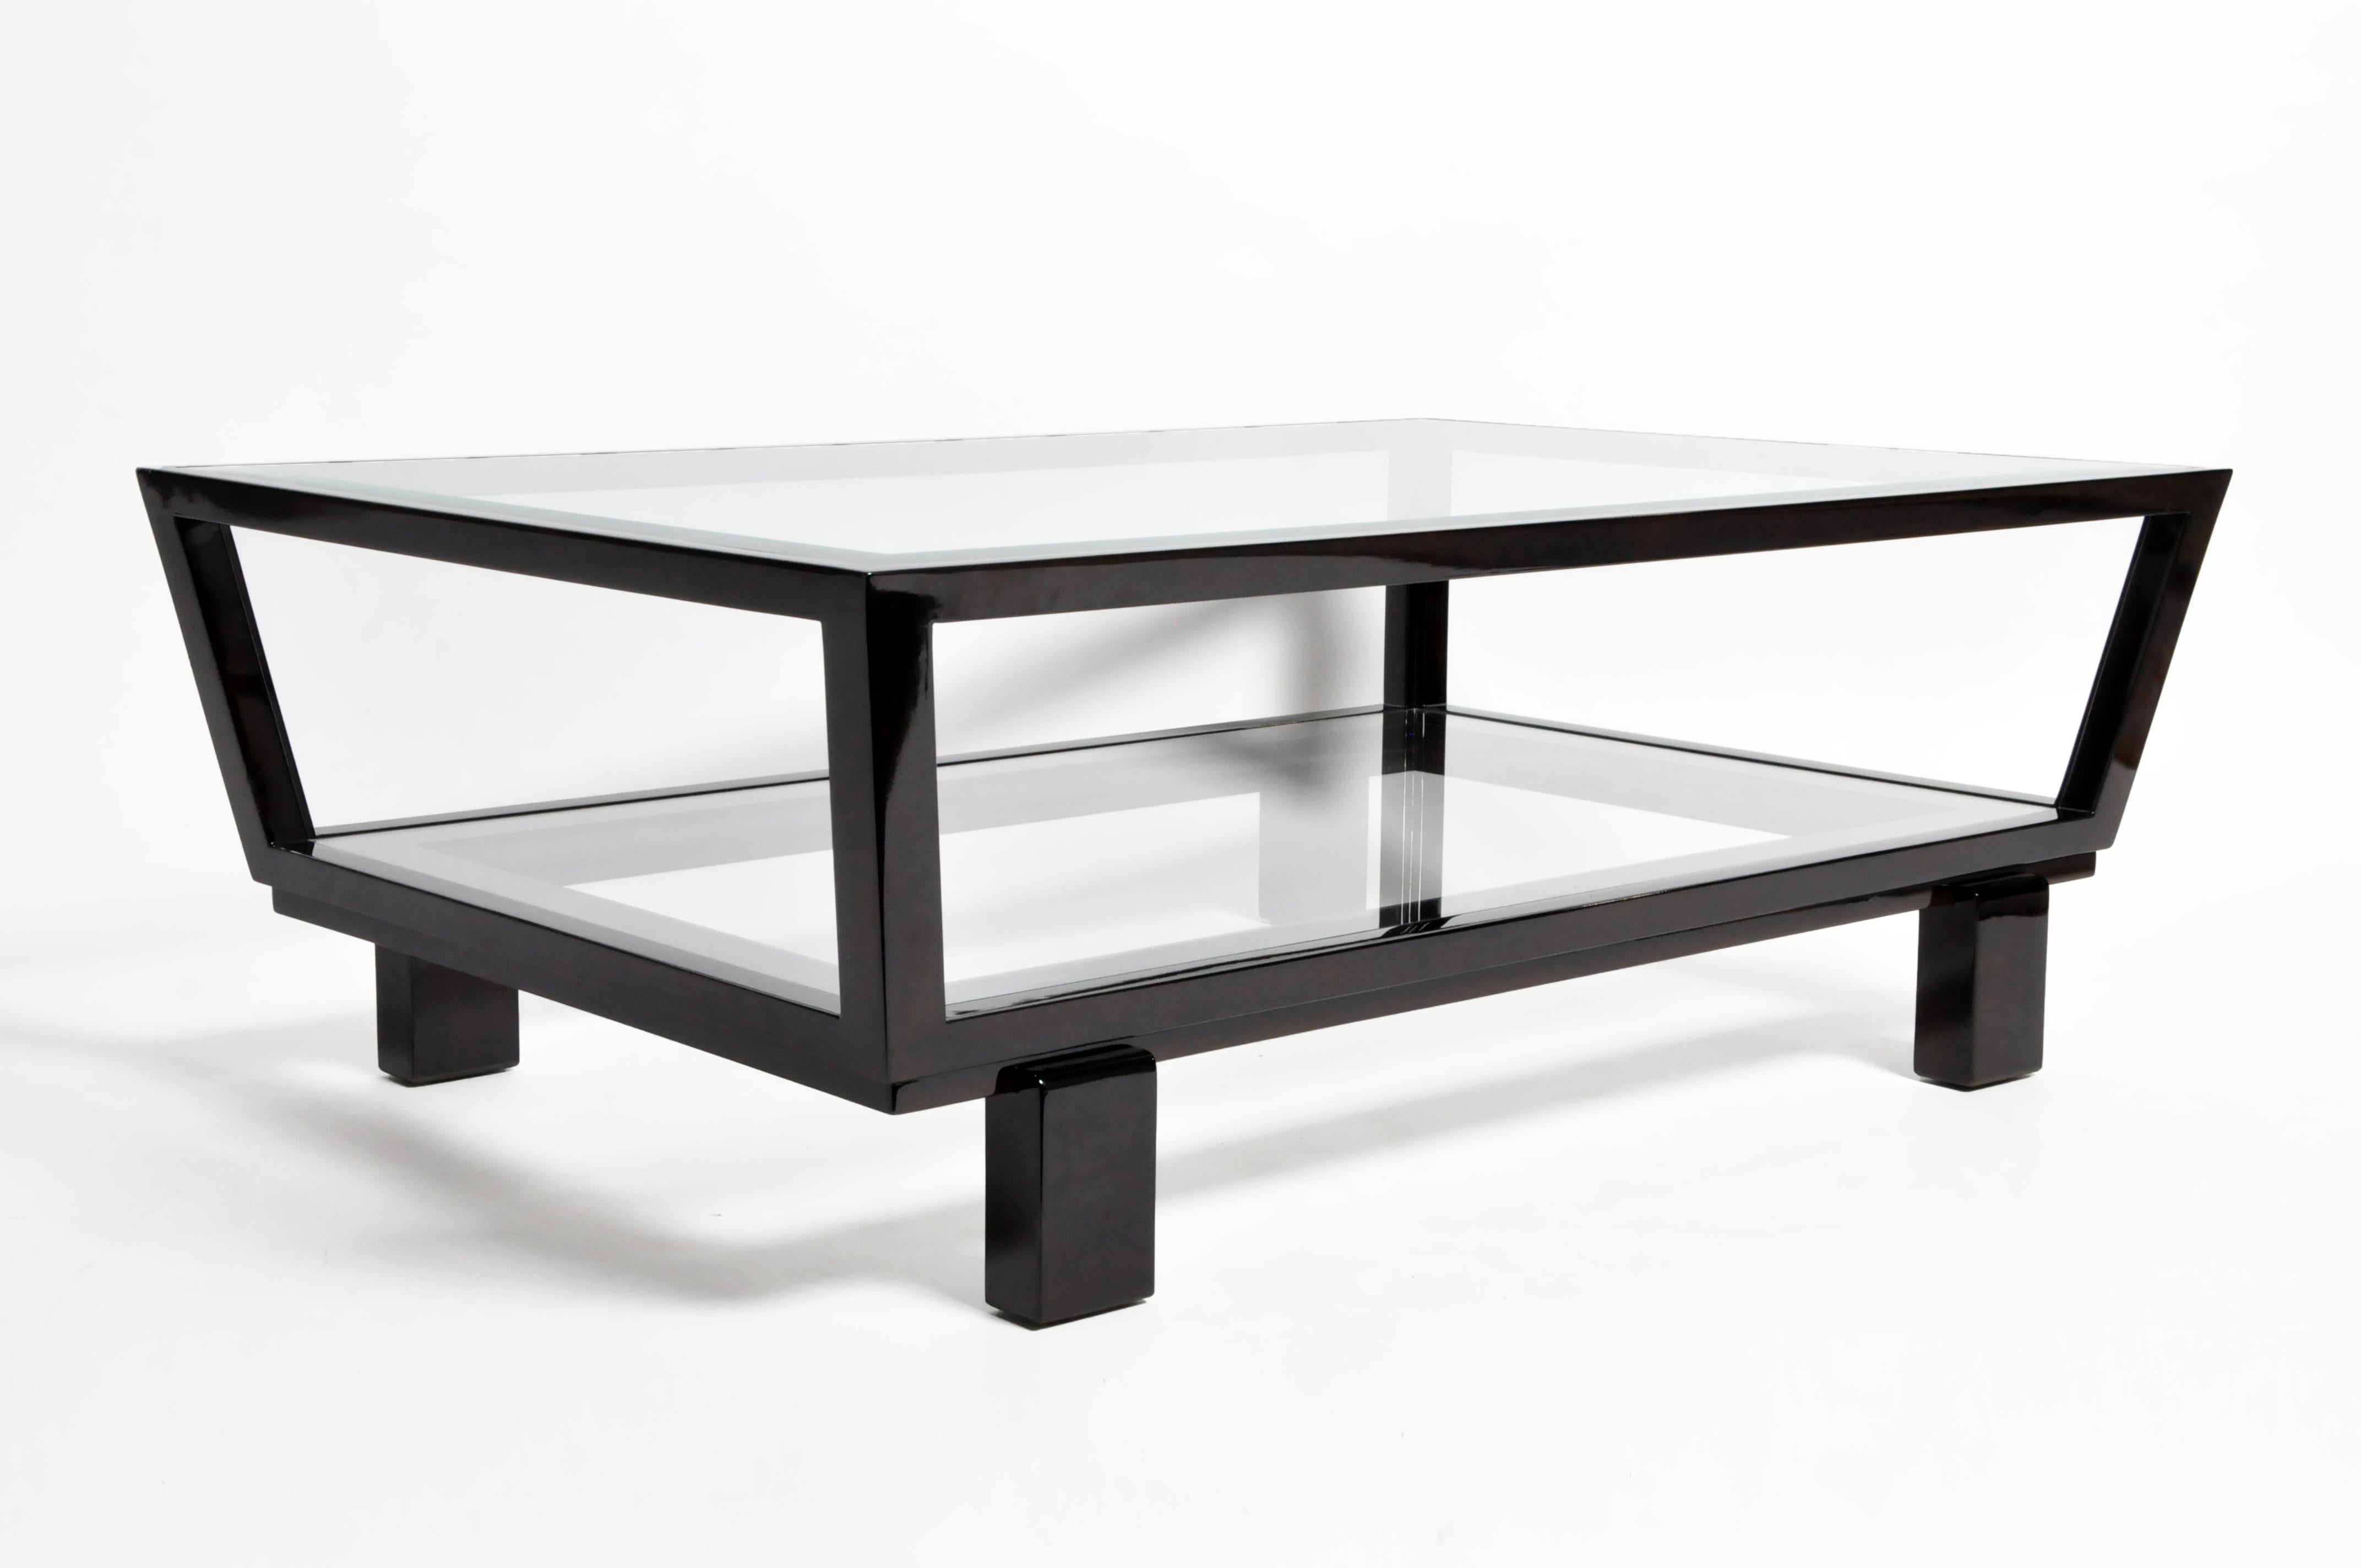 This newly made elegant coffee table is from Hungary and made from solid beech wood and glass. The table features a glass top and a glass shelf underneath for storage, the table has clean beautiful lines for a modern feel.